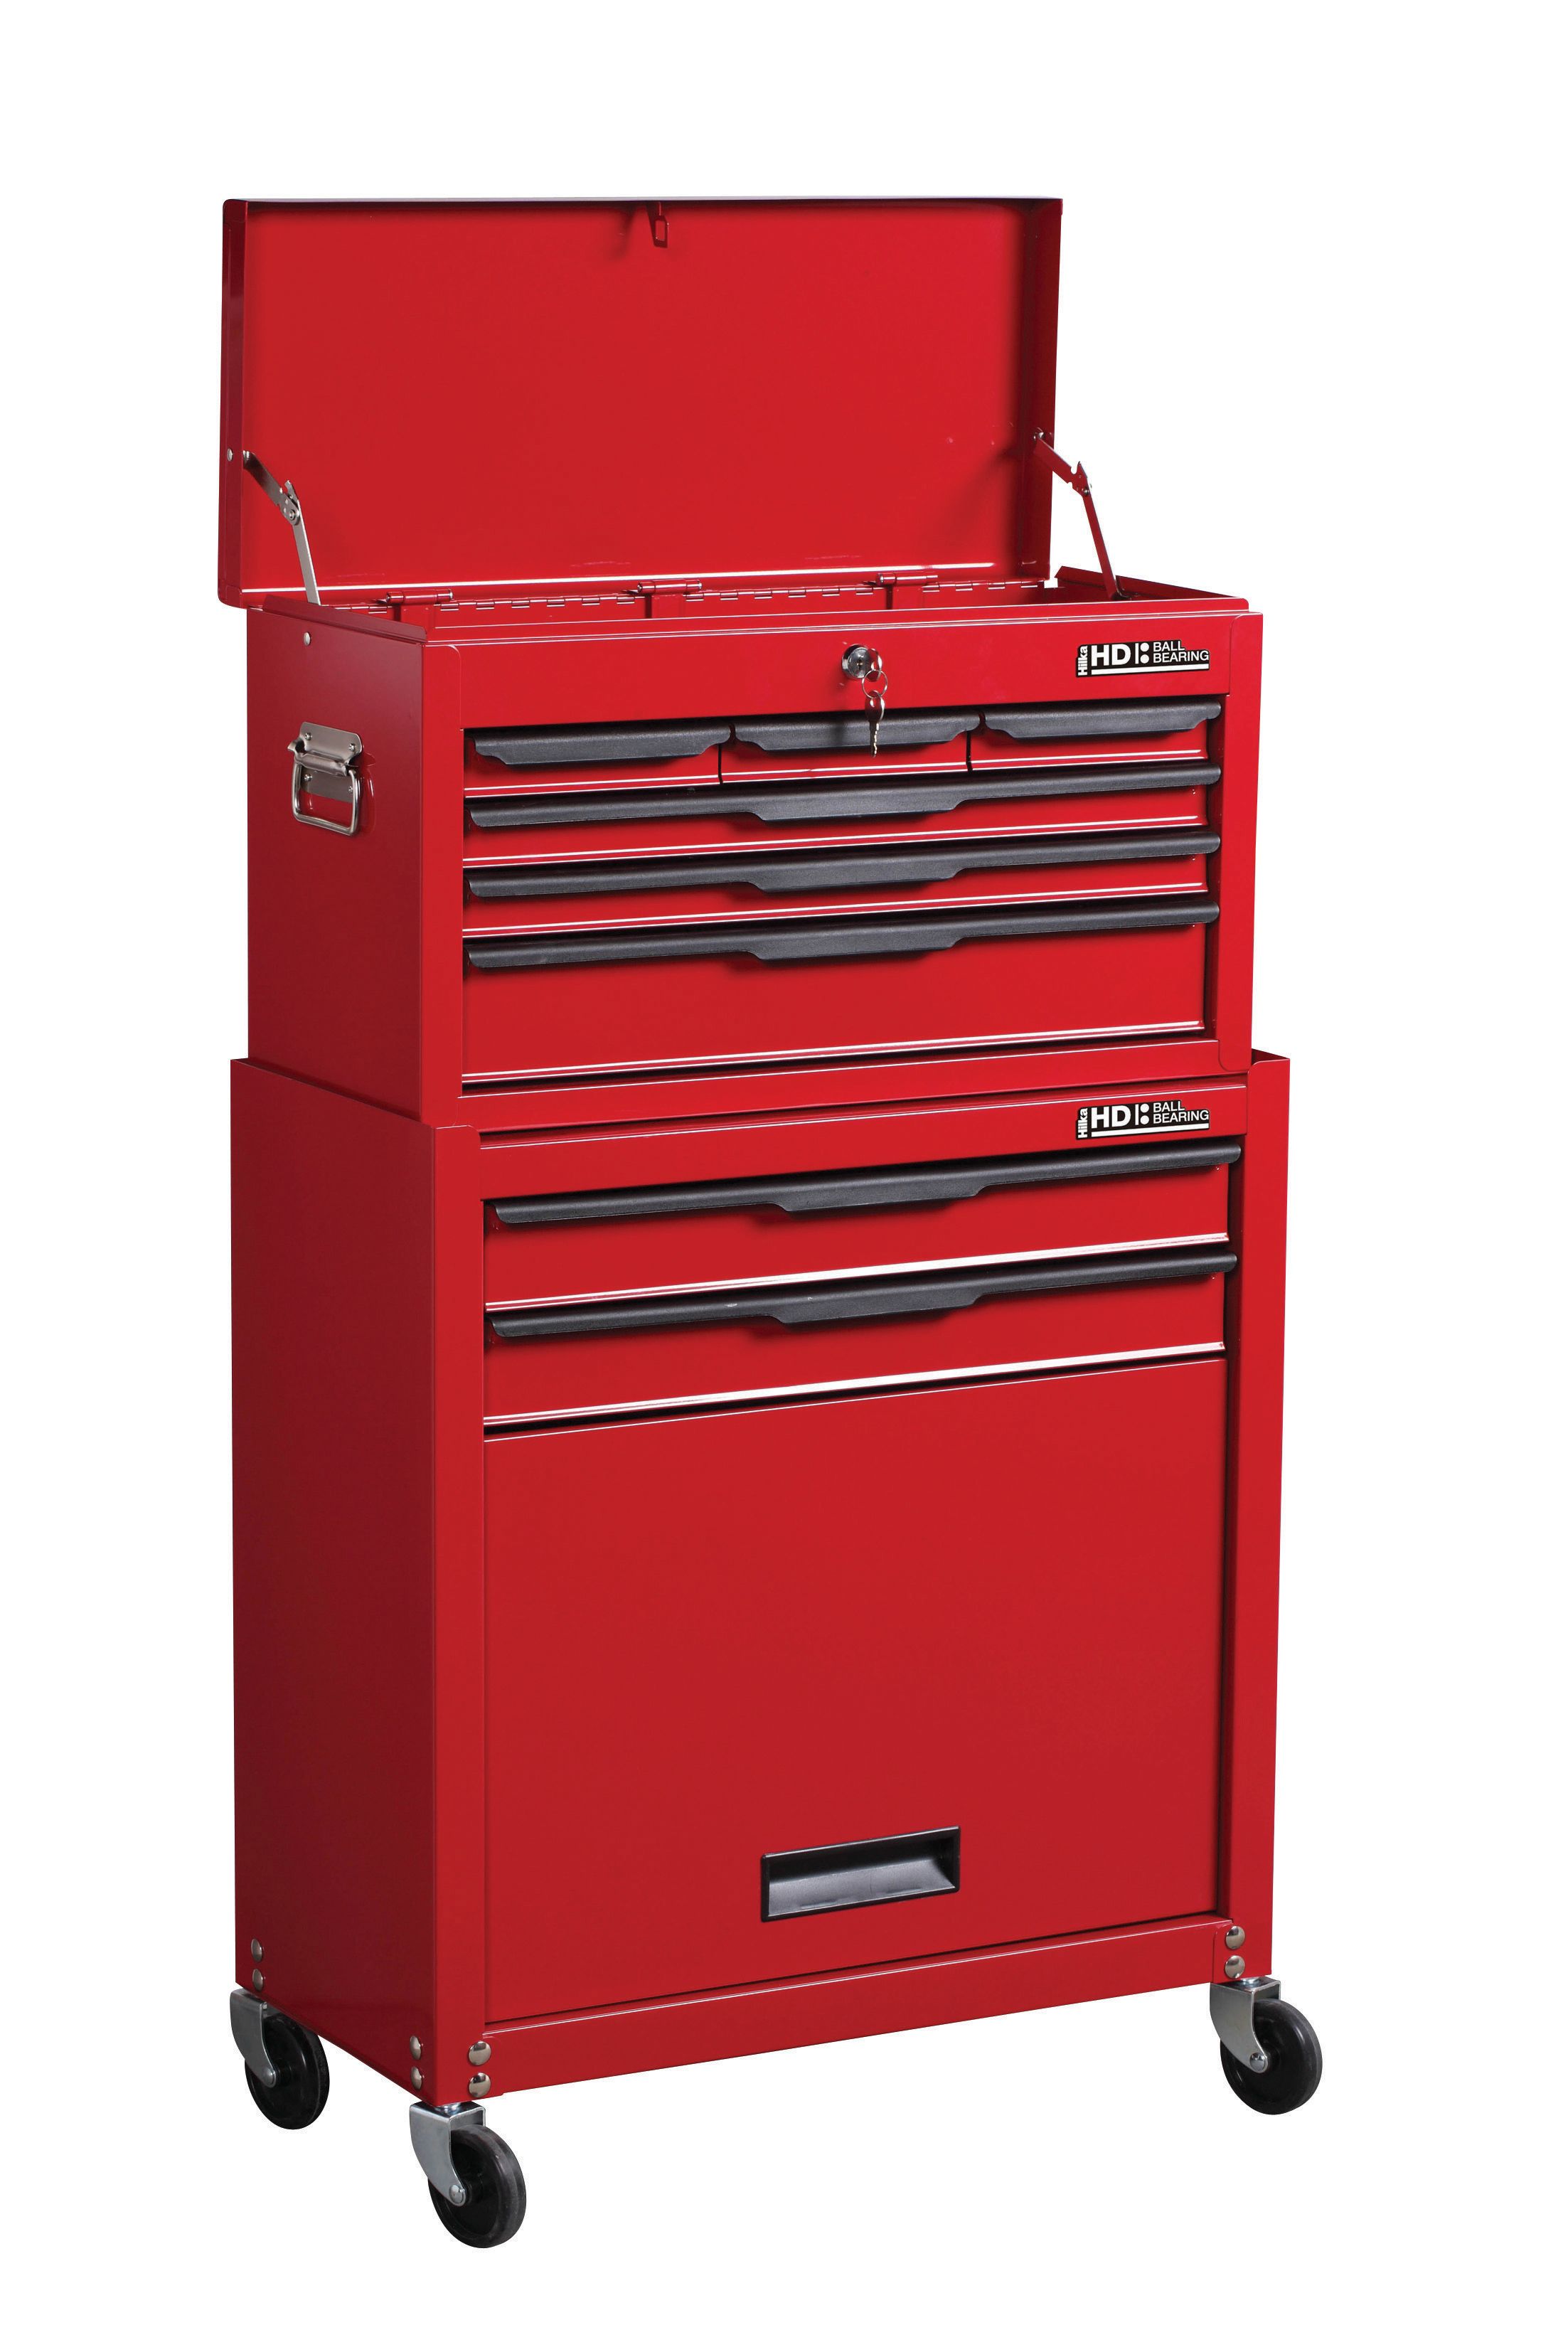 Hilka Heavy Duty 8 Drawer Tool Chest and Cabinet Combination Set - Red